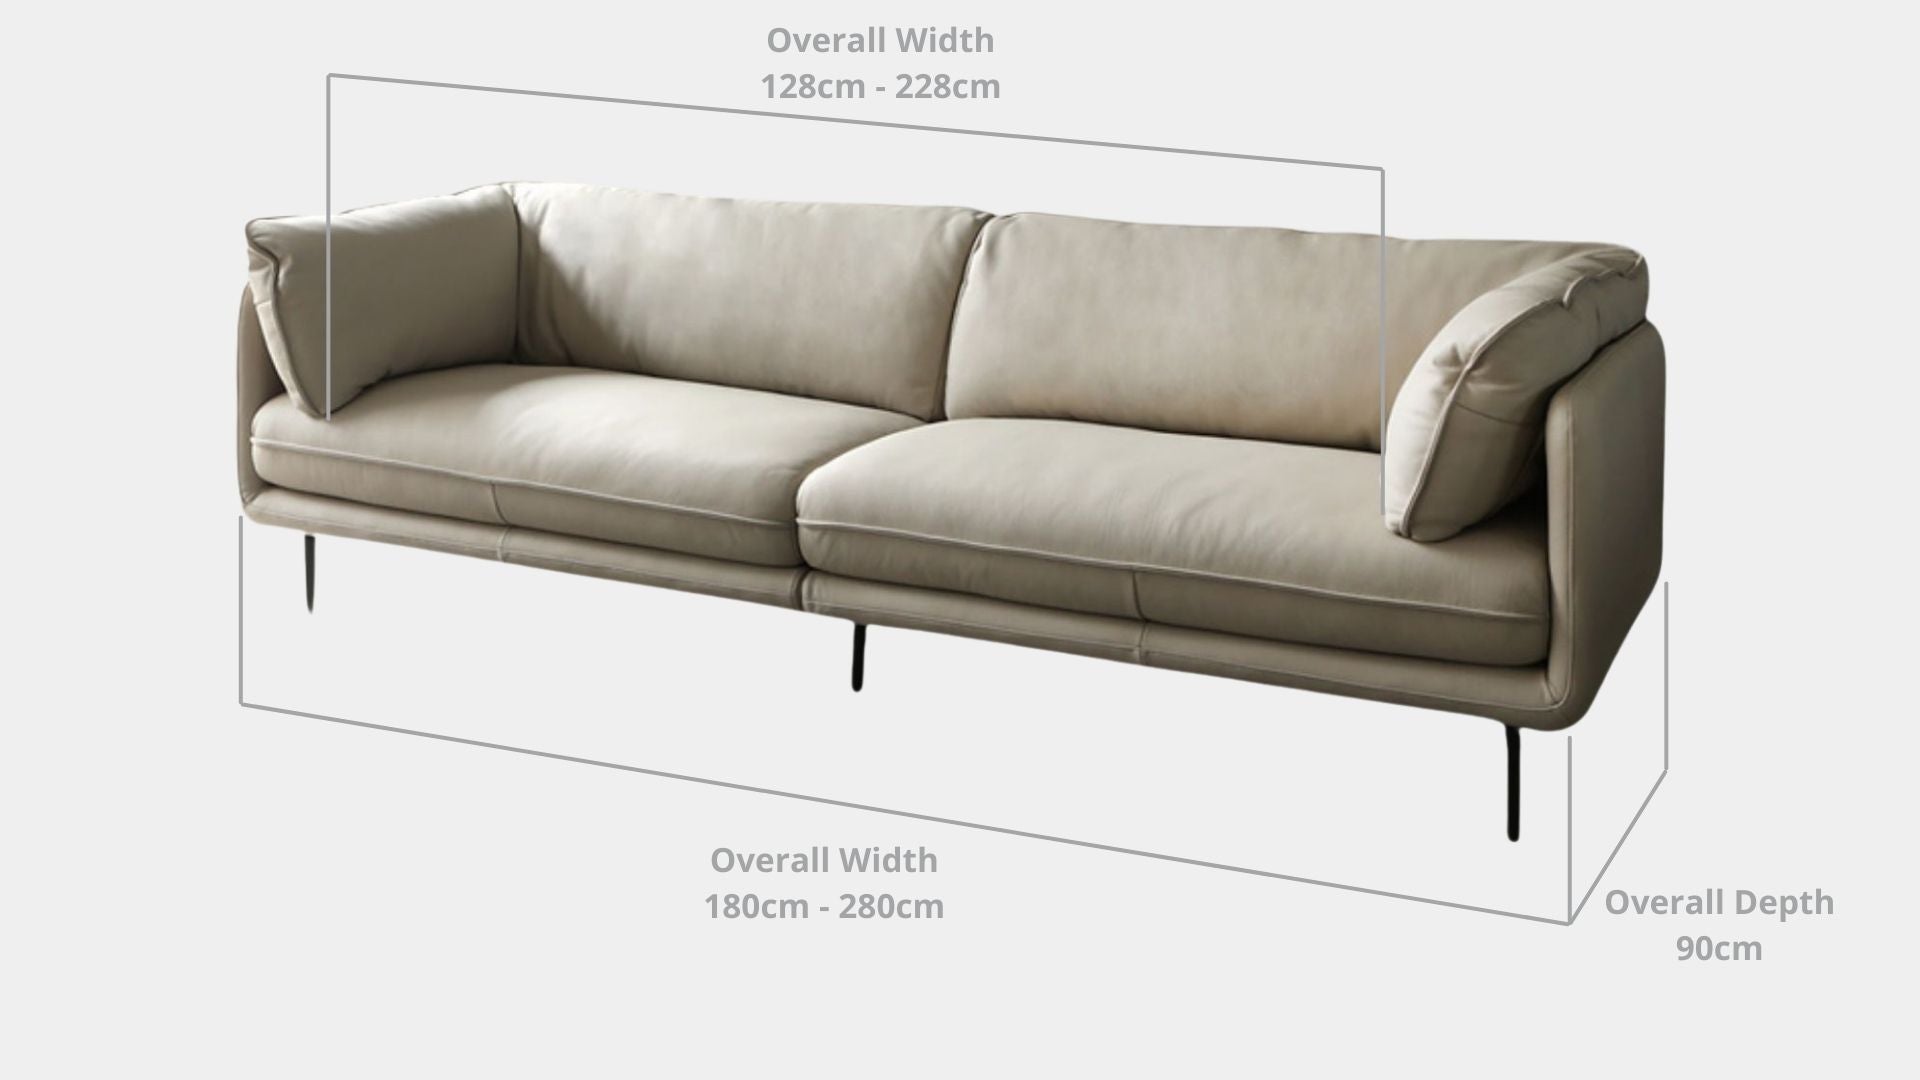 Details the key dimensions in terms of overall width, overall depth and seat width for Cuddle Half Leather Sofa